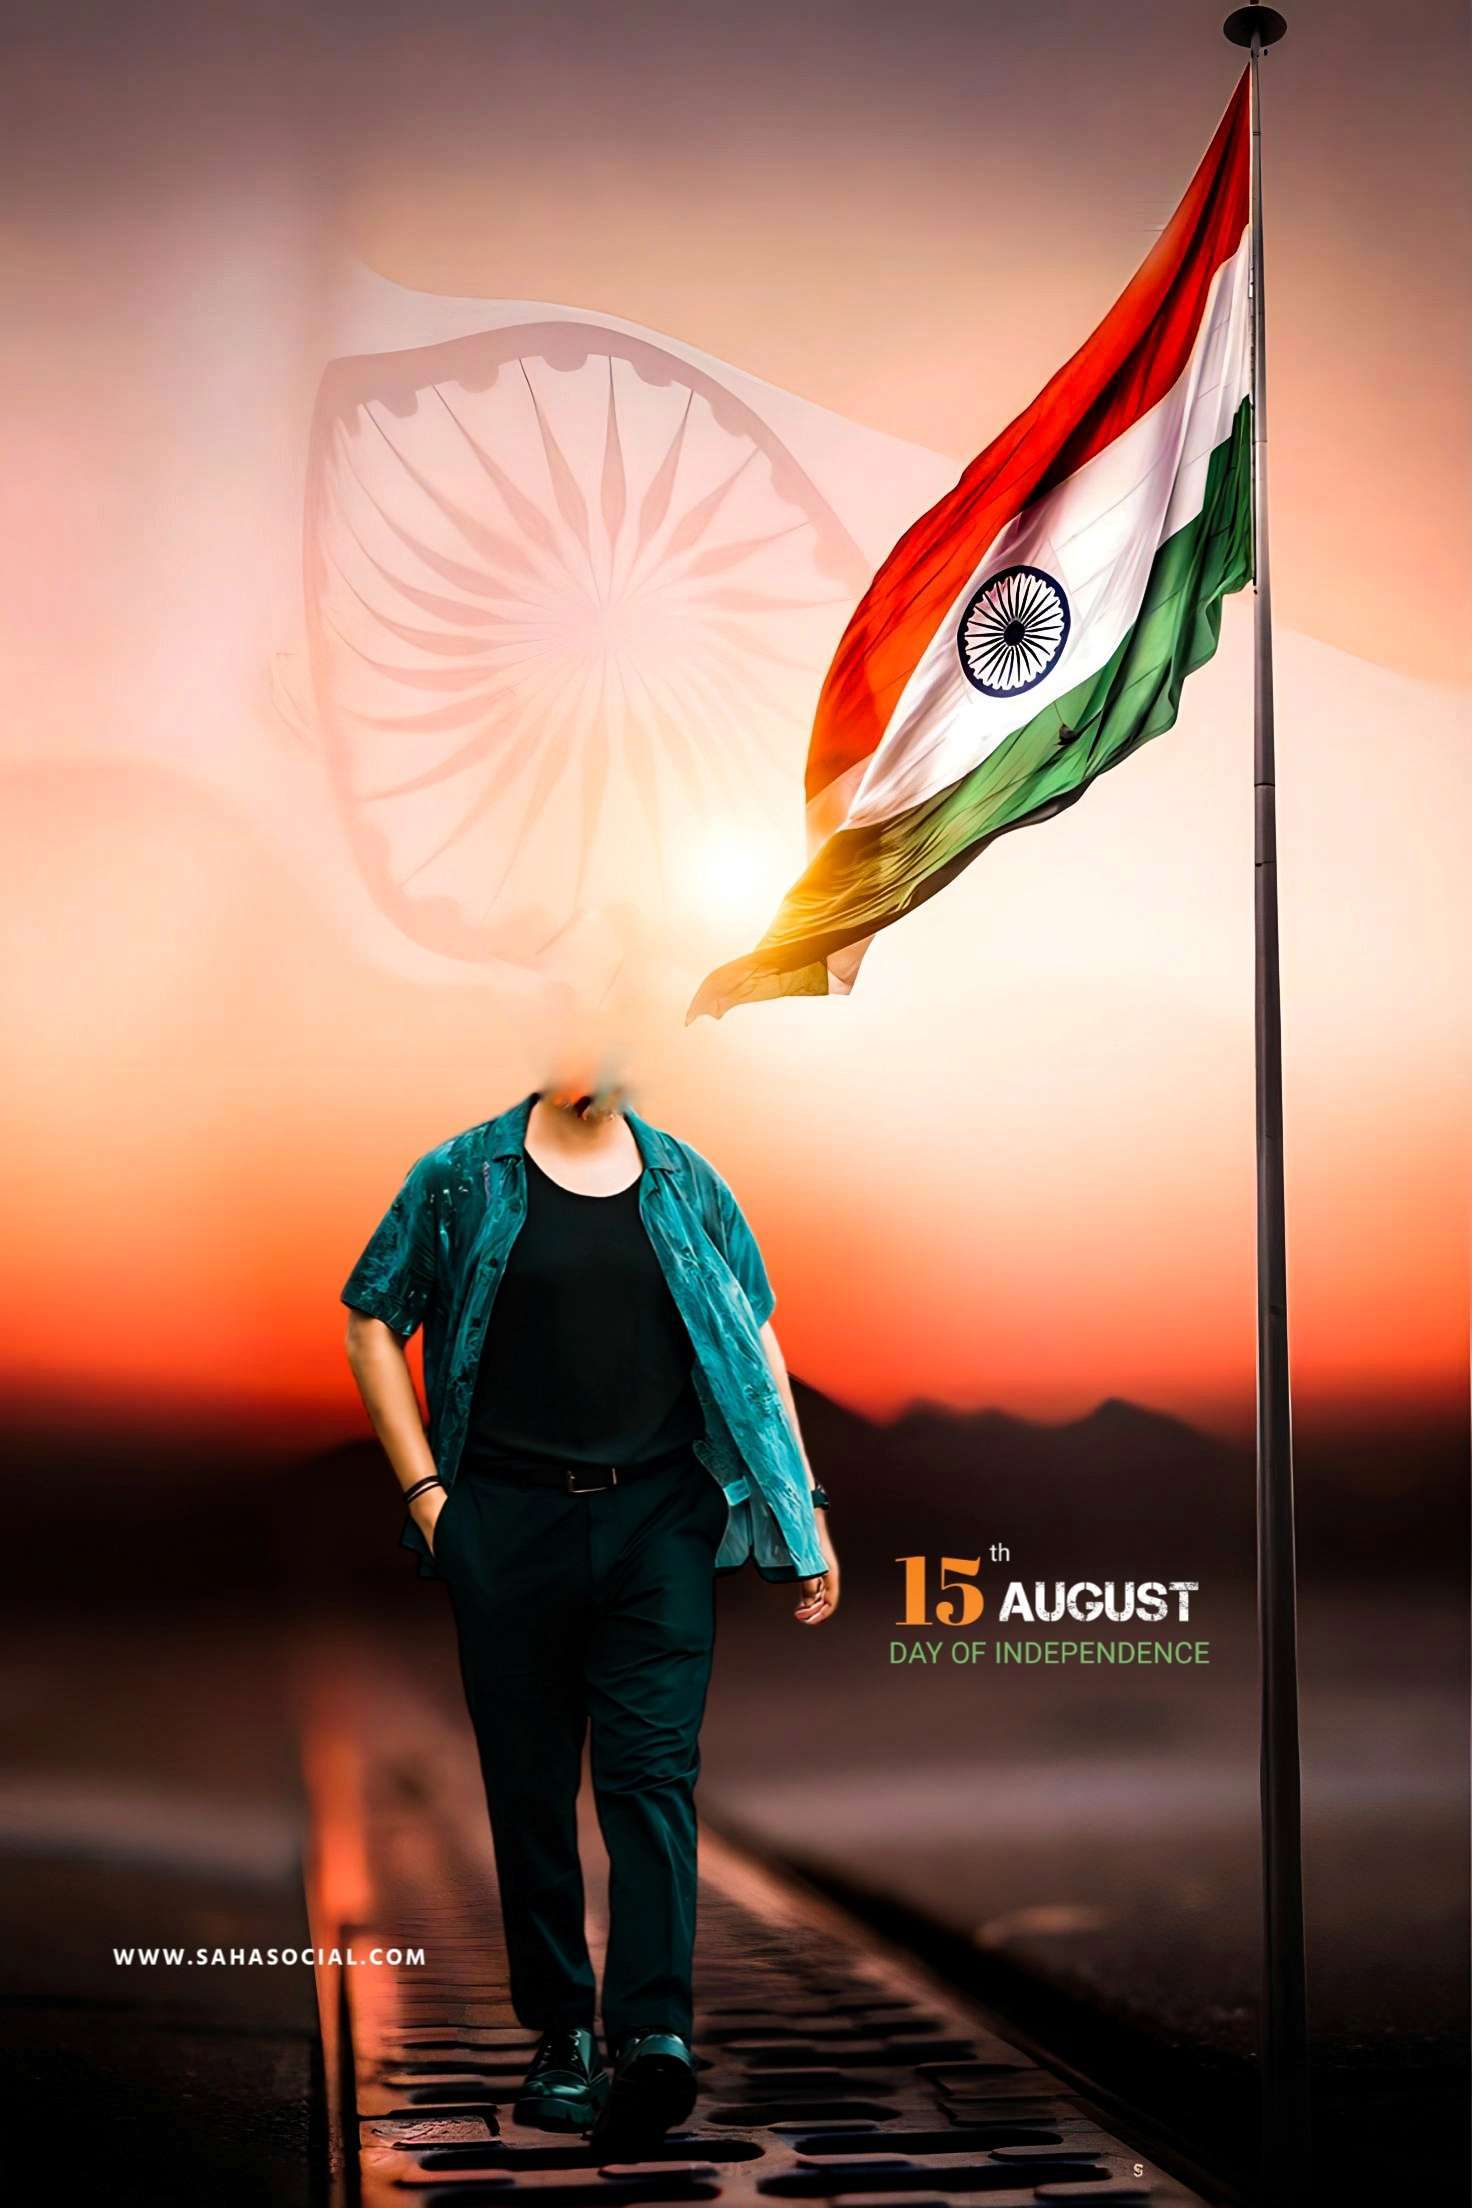 15 August Photo Editing background without face, independence day Photo Editing background without face, photo Editing with flag,15 August Photo pose